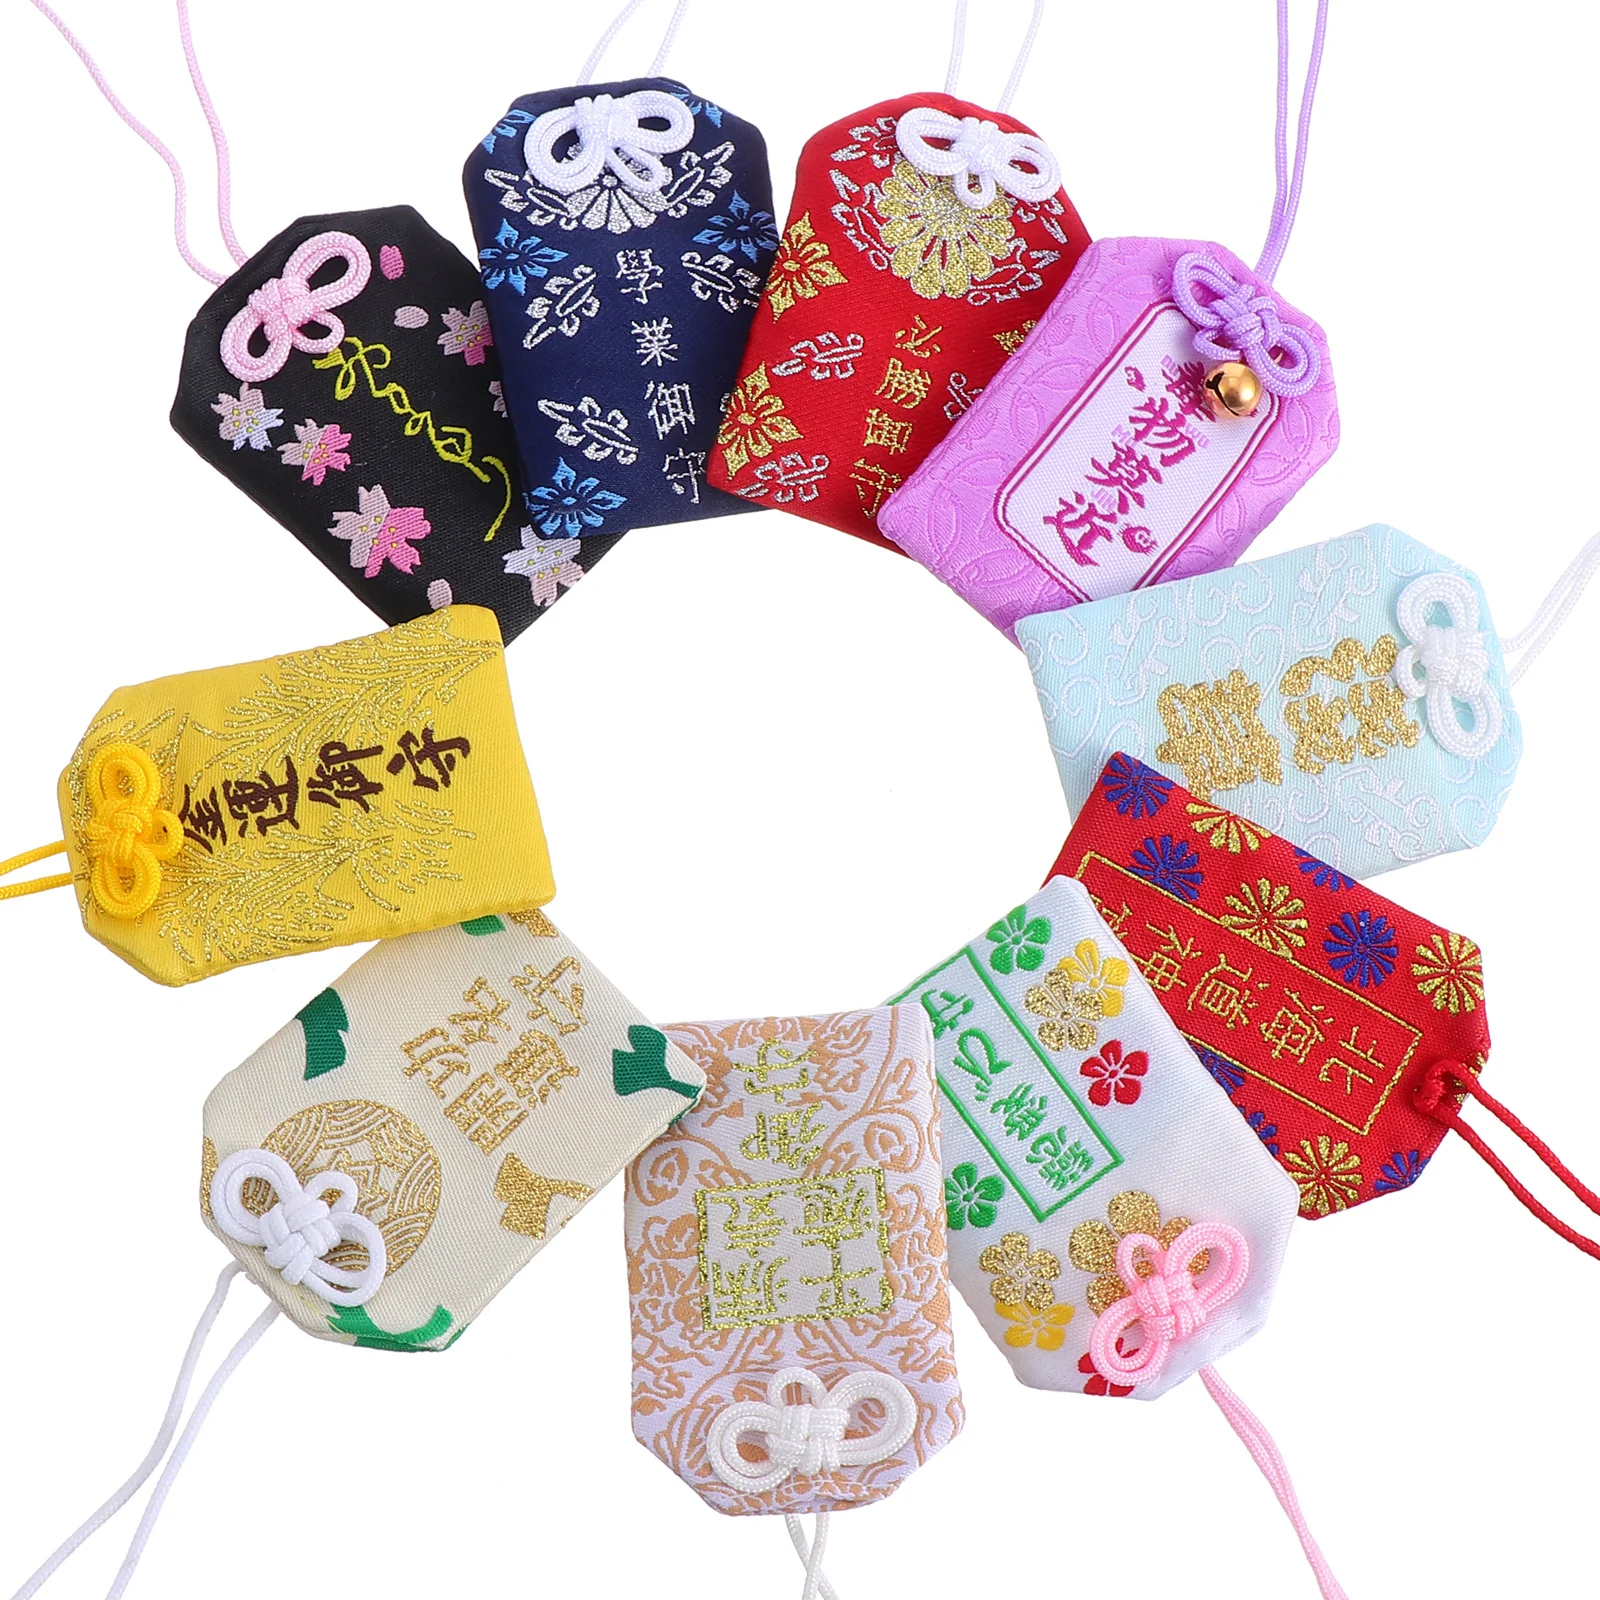 Japanese Amulet Omamori Charms Charm Bag Fortune Luck Lucky Pendant Good Blessing Sachet Hanging Amulets Car Shrine Peace Temple